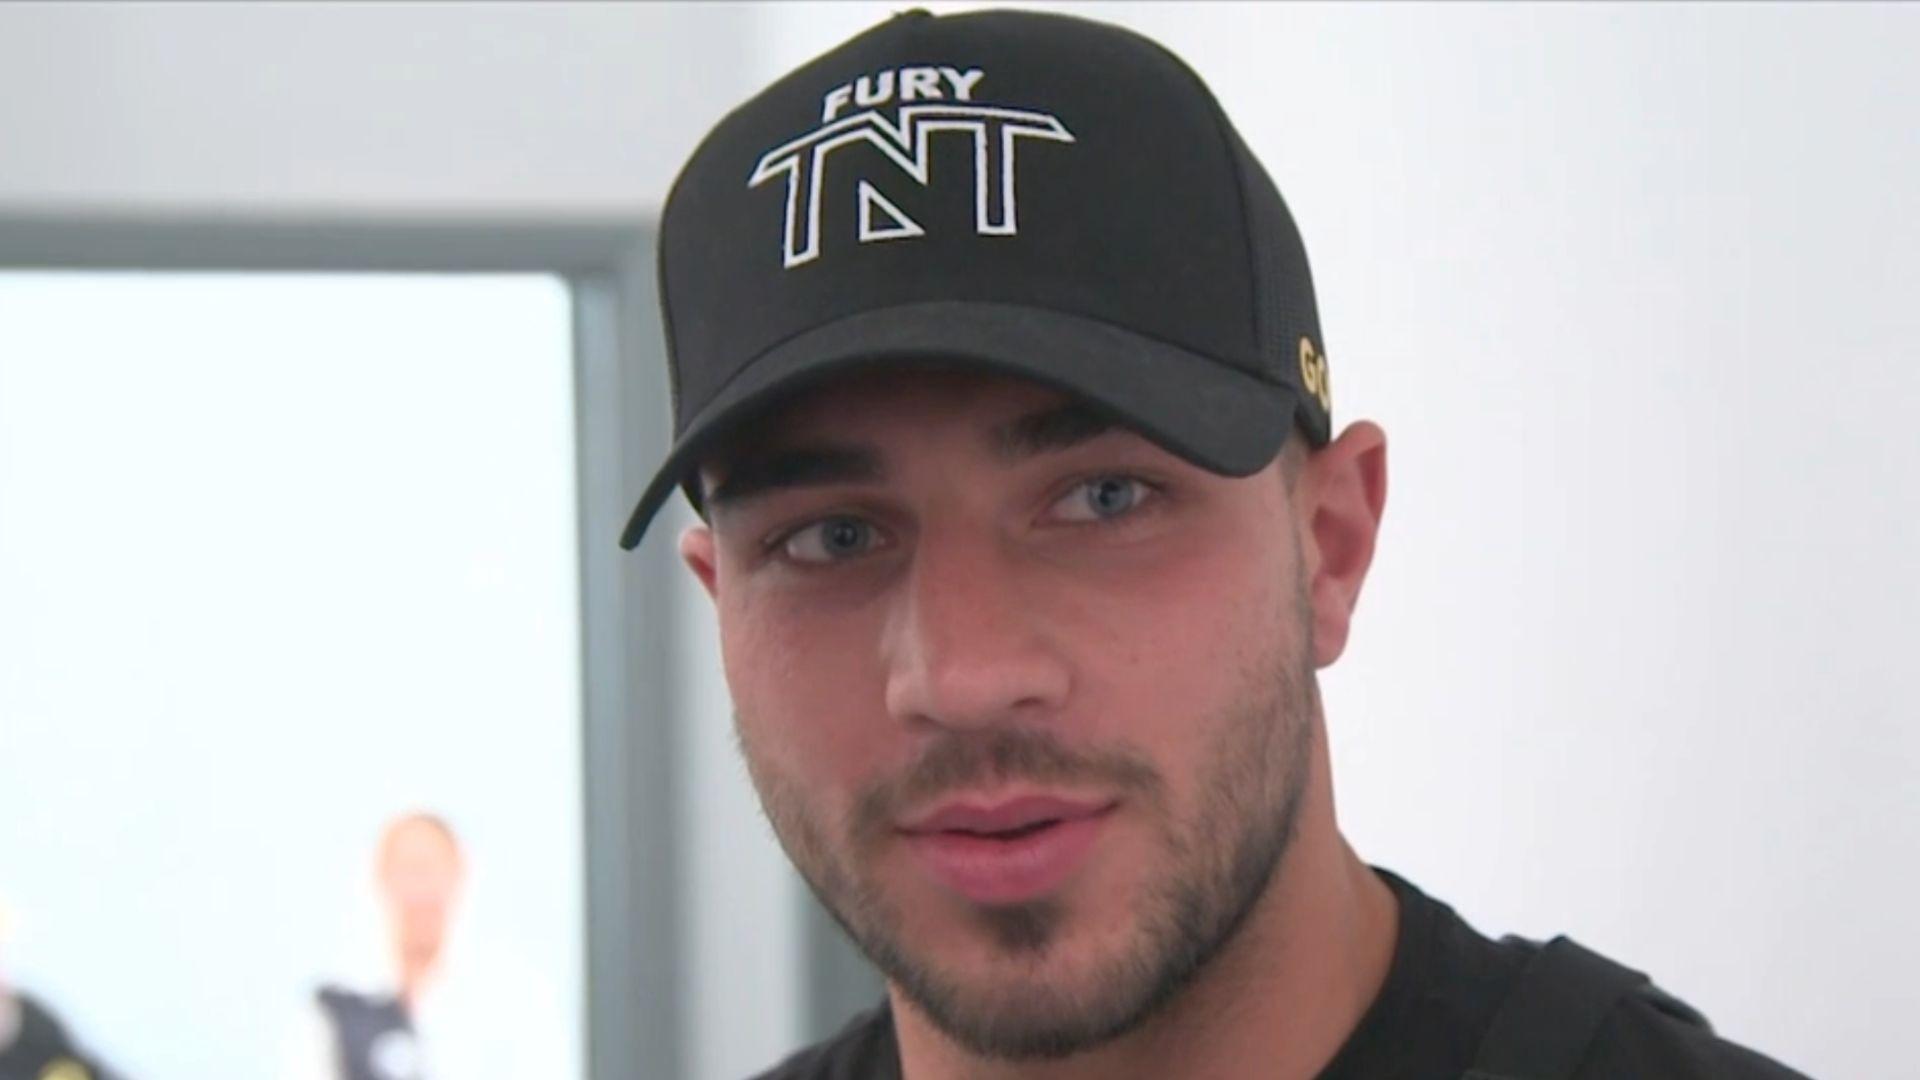 Tommy Fury in black and white hat talking into microphone